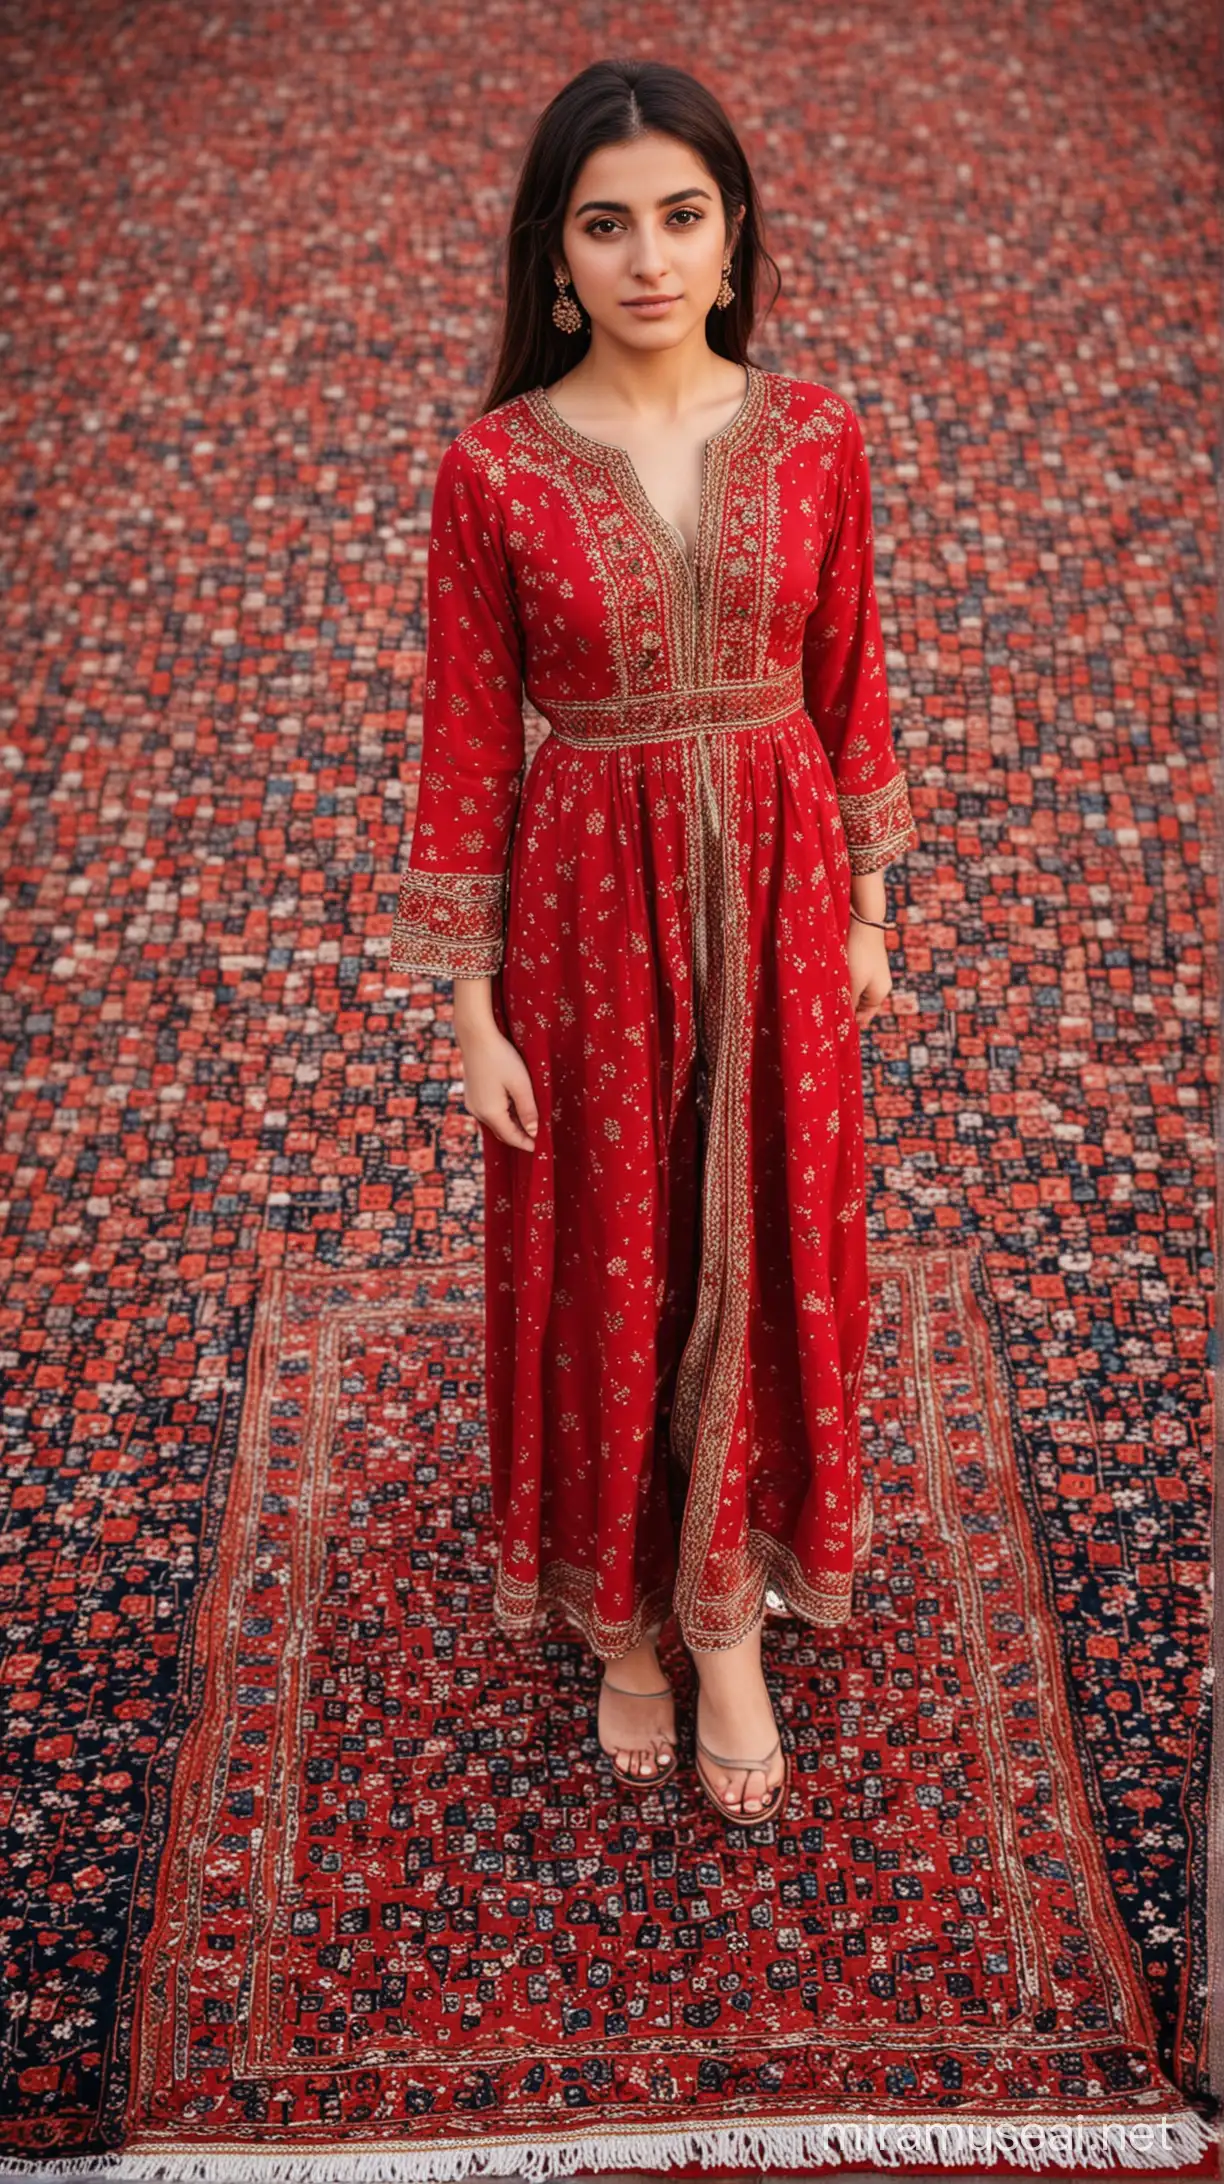 Iranian girl in an Iranian dress standing in the middle of the Iranian red carpet